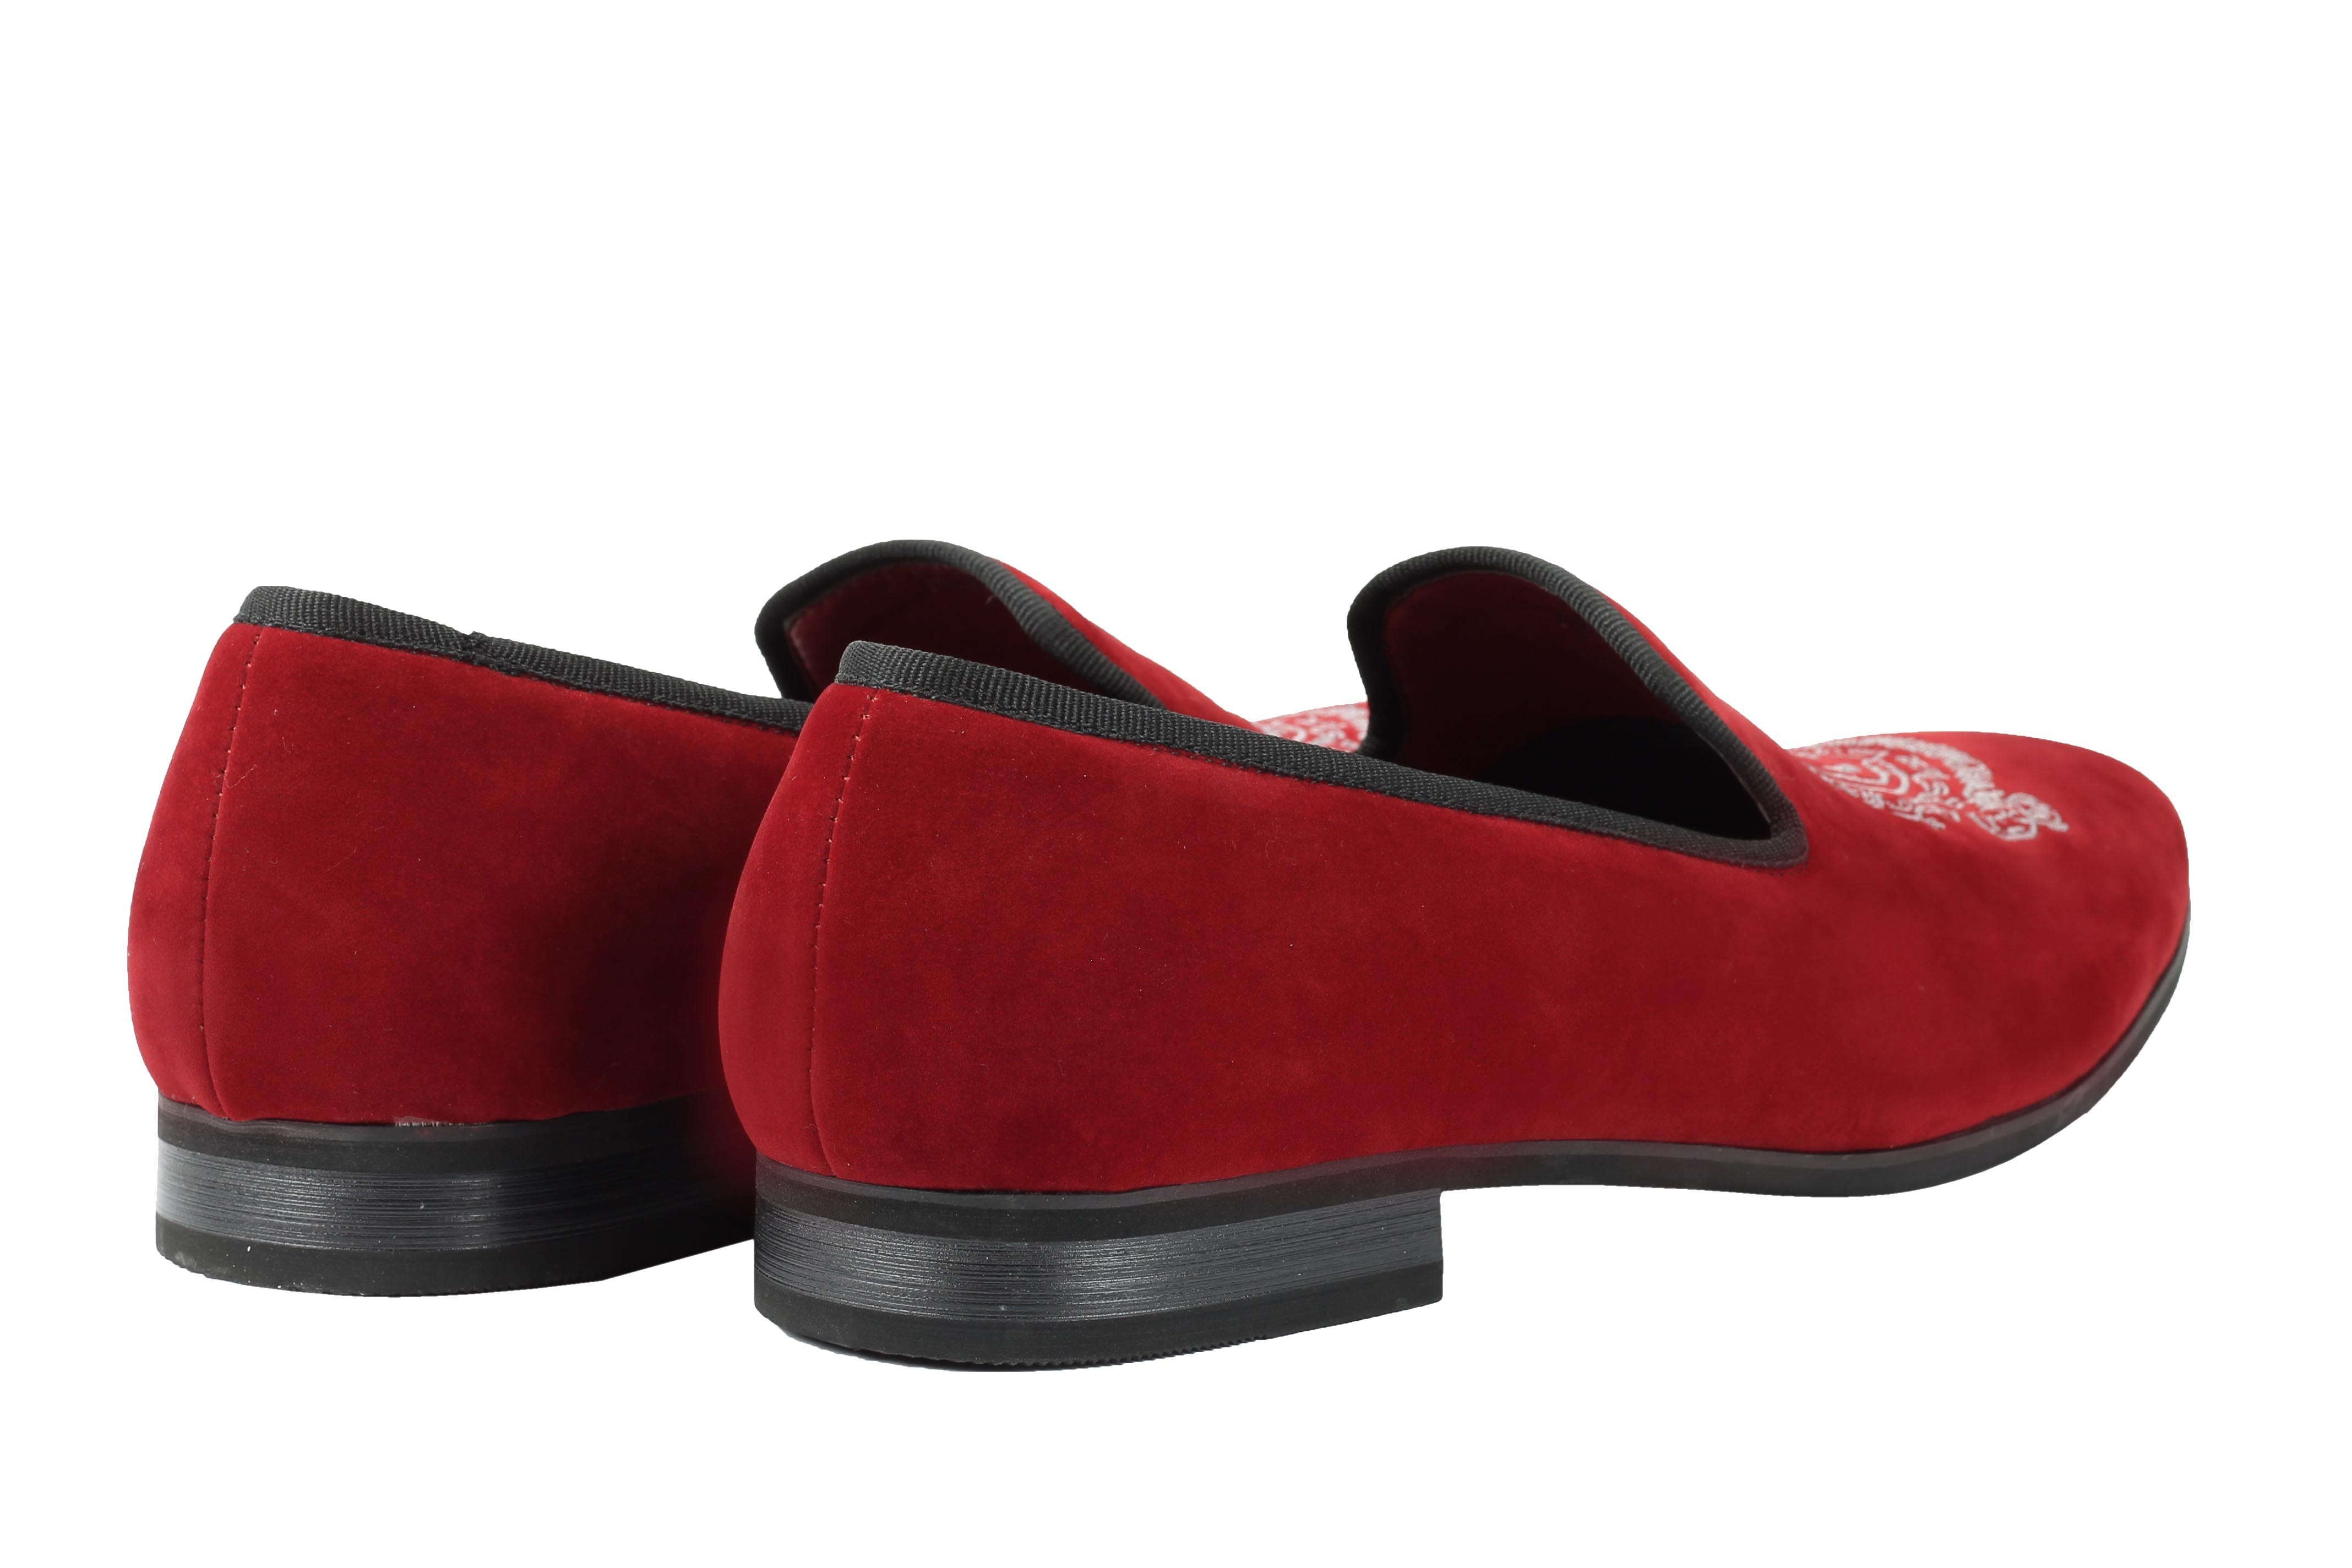 Faux Velvet Embroidery Suede Leather Loafers In Maroon